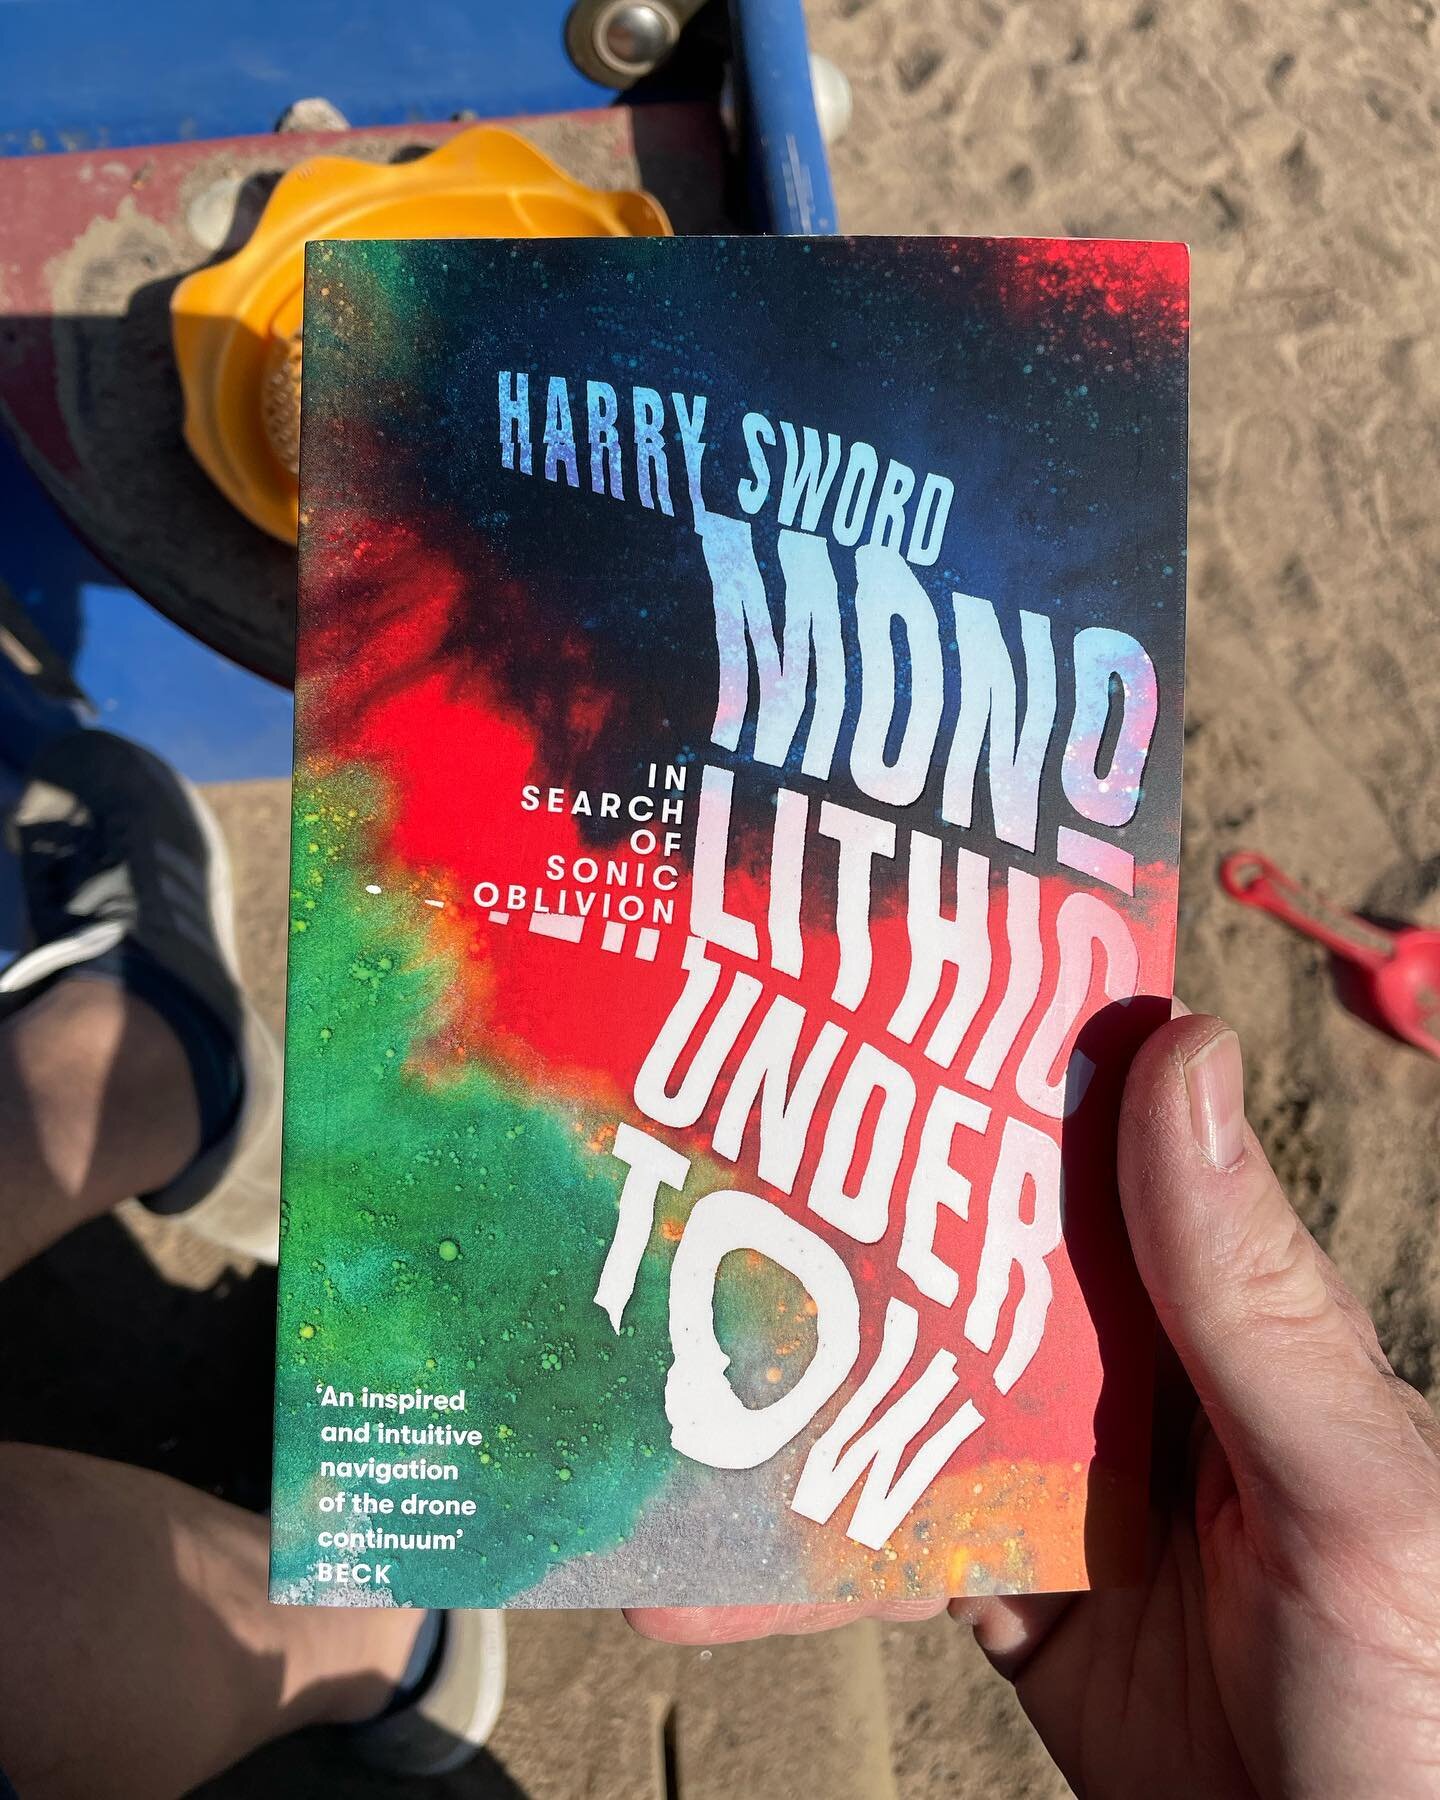 Harry Sword - Monolithic Undertow: In Search of Sonic Oblivion

&rdquo;'An inspired and intuitive navigation of the drone continuum . . . with a compass firmly set to new and enlightening psychedelic truths' BECK

Monolithic Undertow alights a crooke